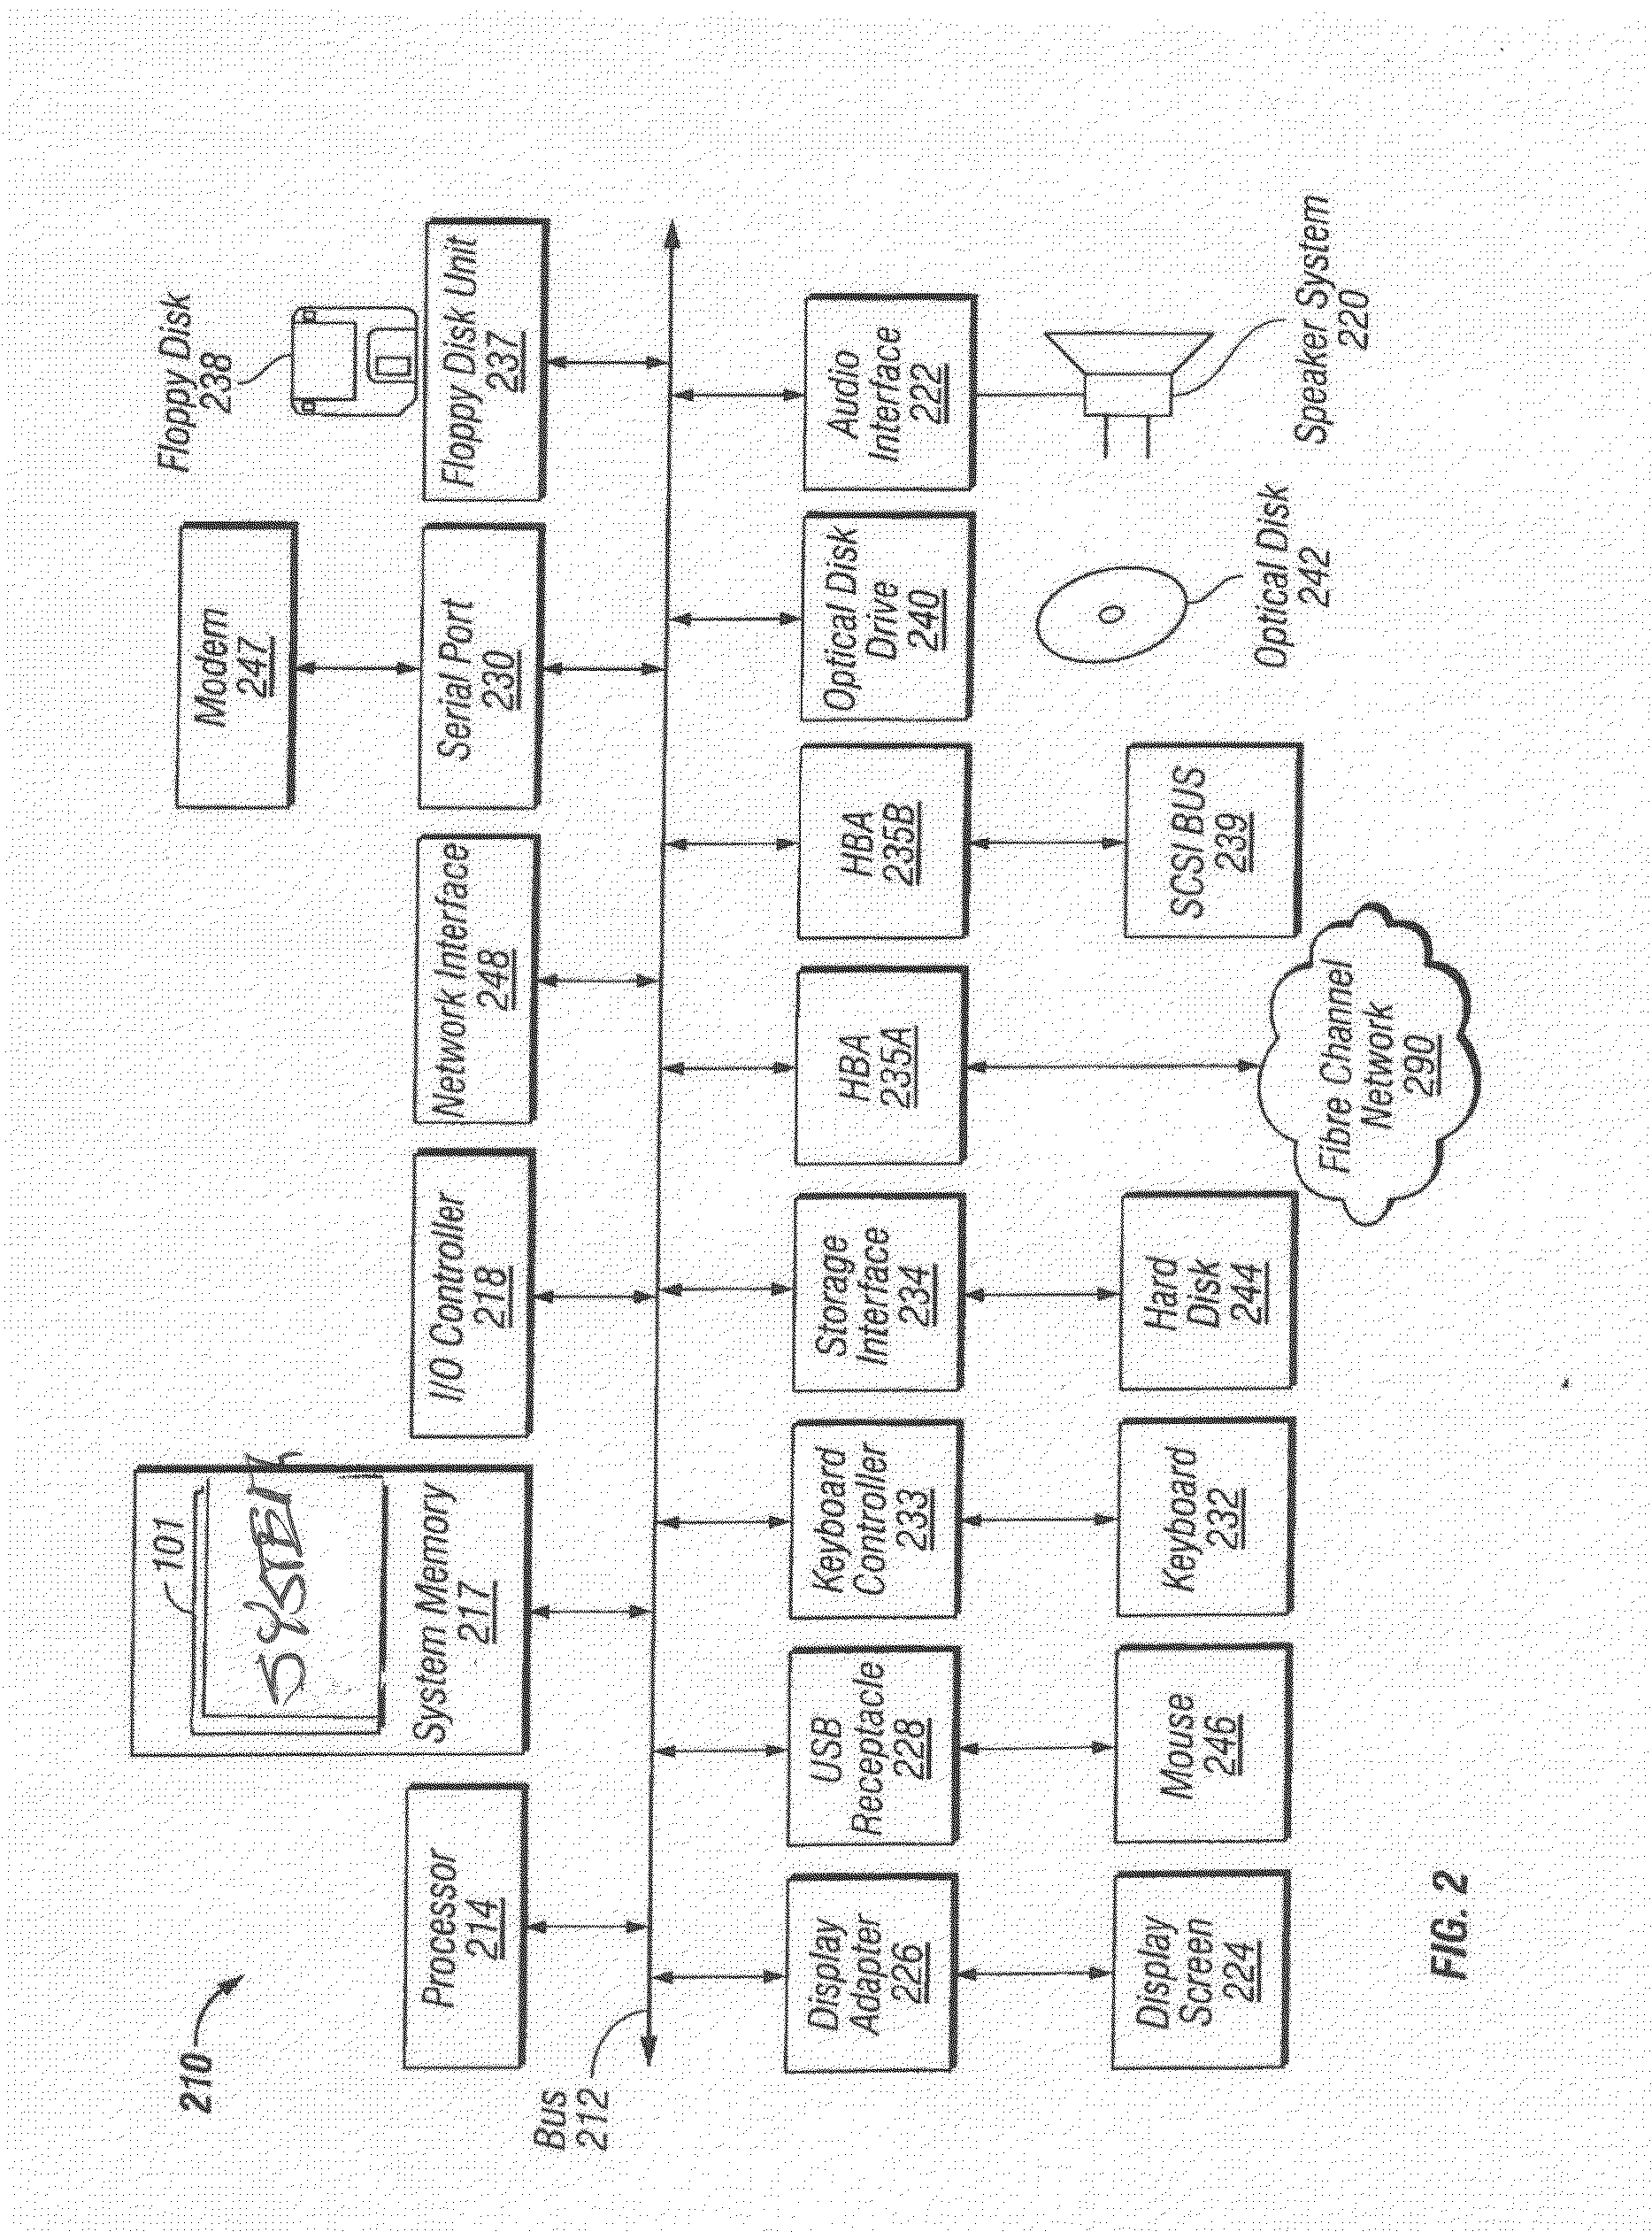 System and method for permission based digital content syndication, monetization, and licensing with access control by the copyright holder